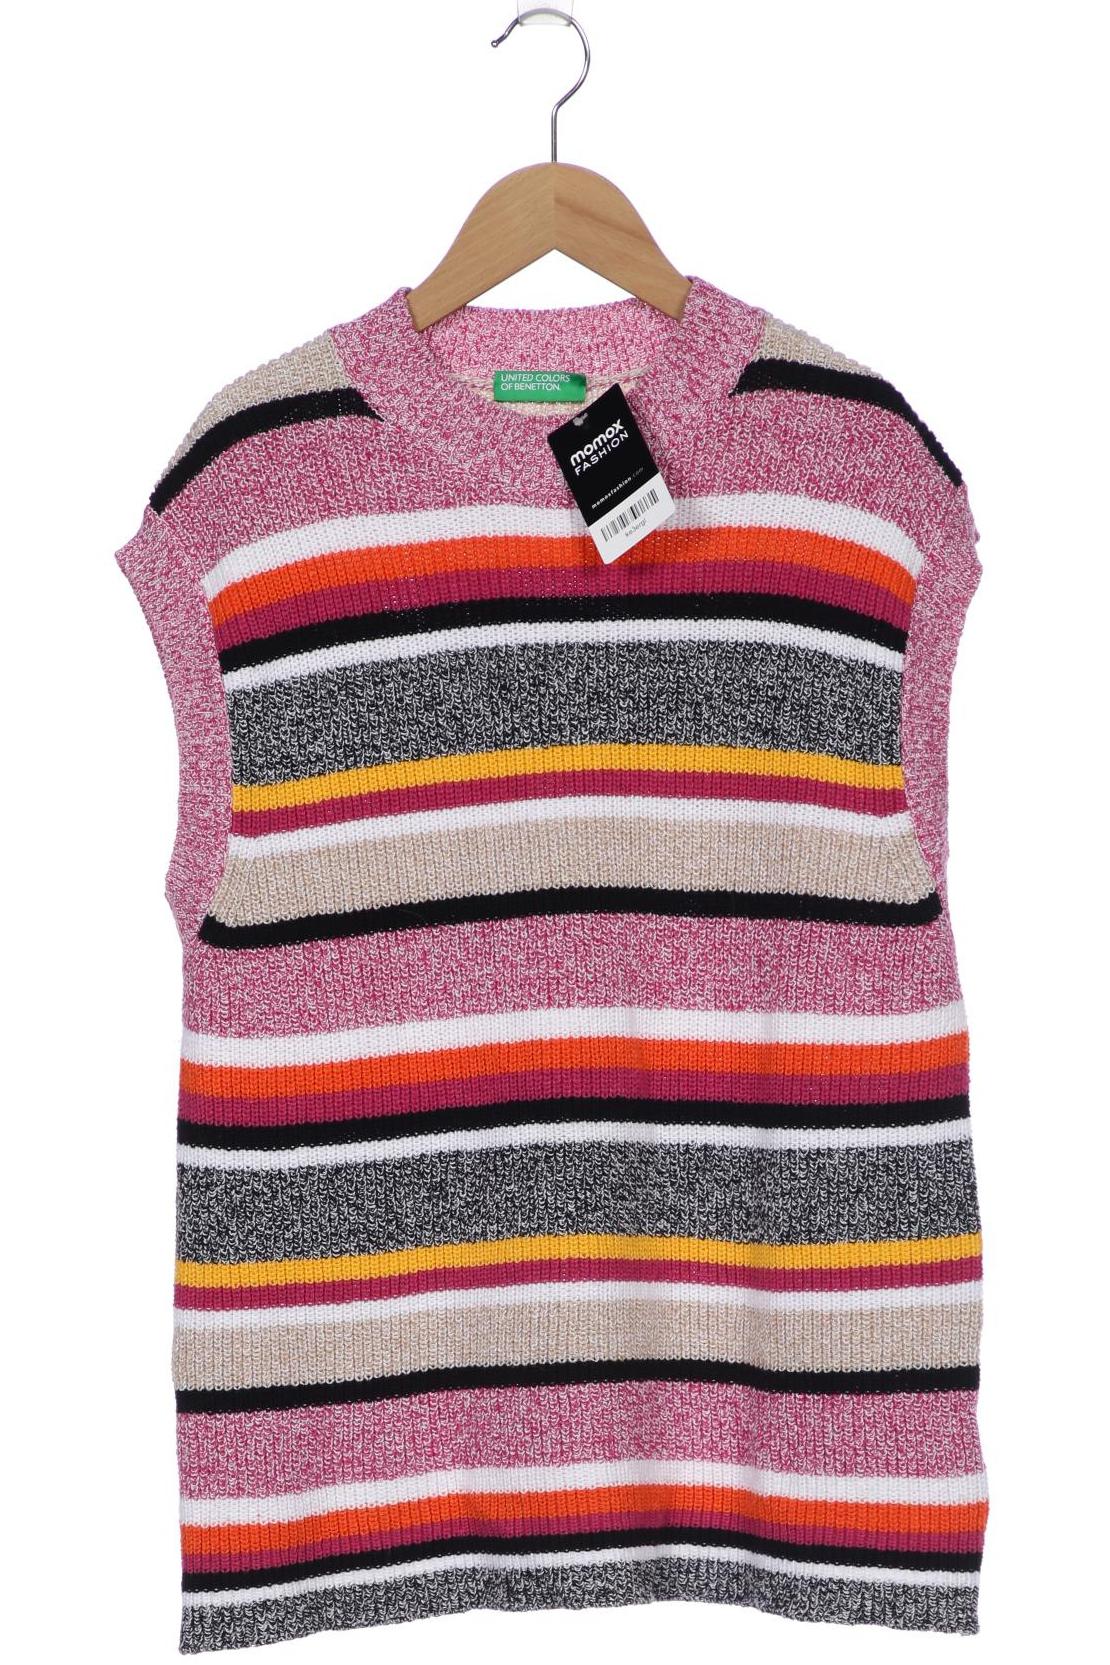 UNITED COLORS OF BENETTON Damen Pullover, pink von United Colors of Benetton